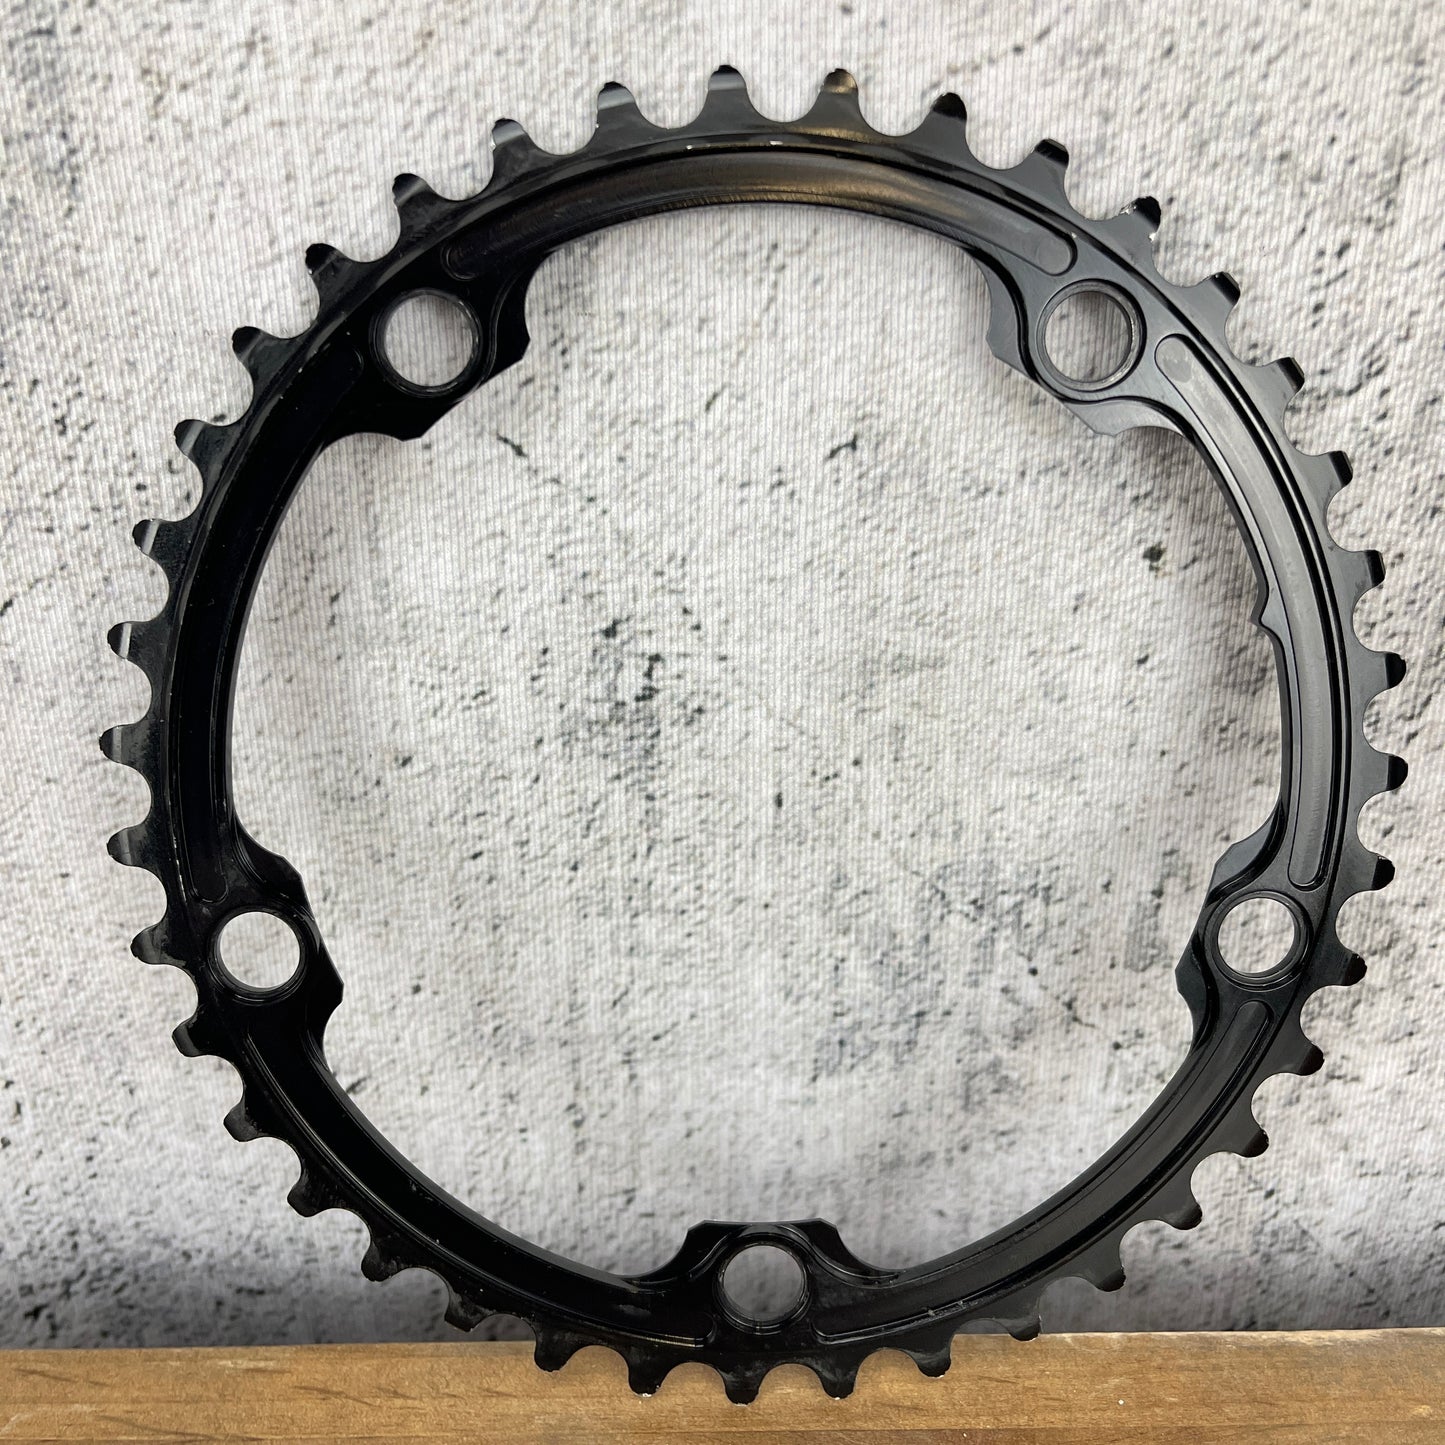 Absolute Black Premium Oval 5-Bolt 130BCD 53/39t Chainrings Set